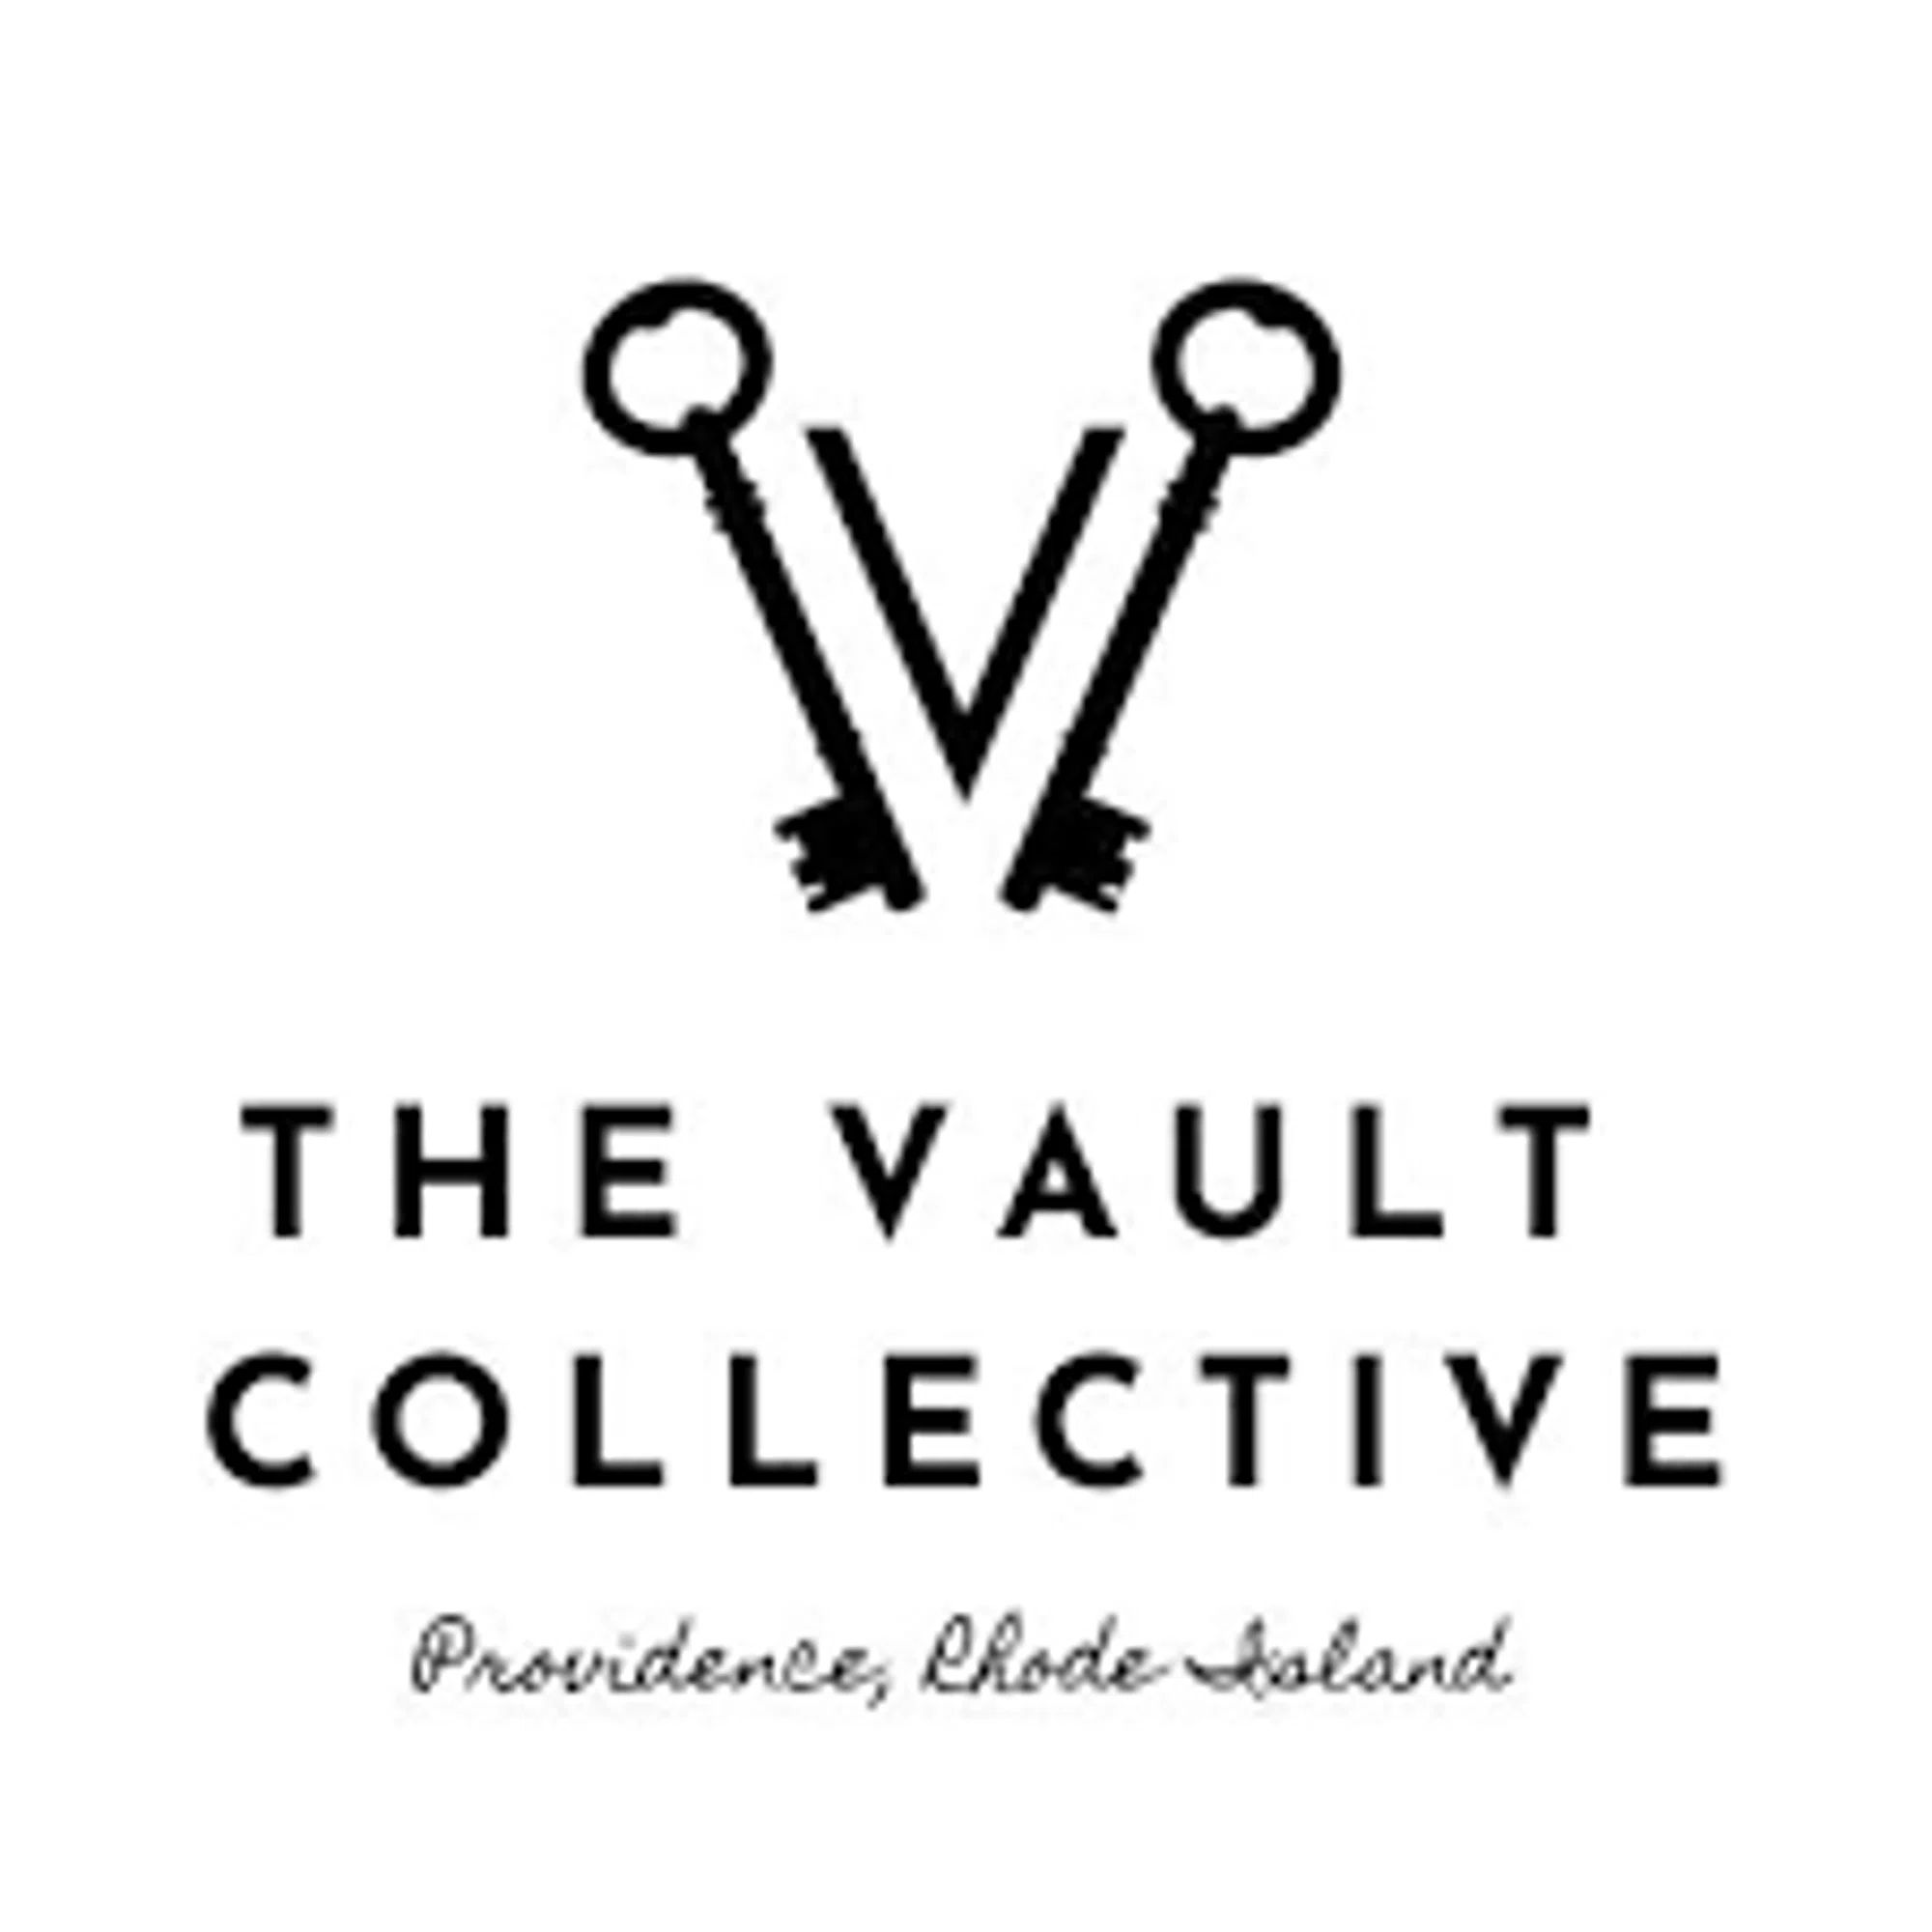 The Vault Collective